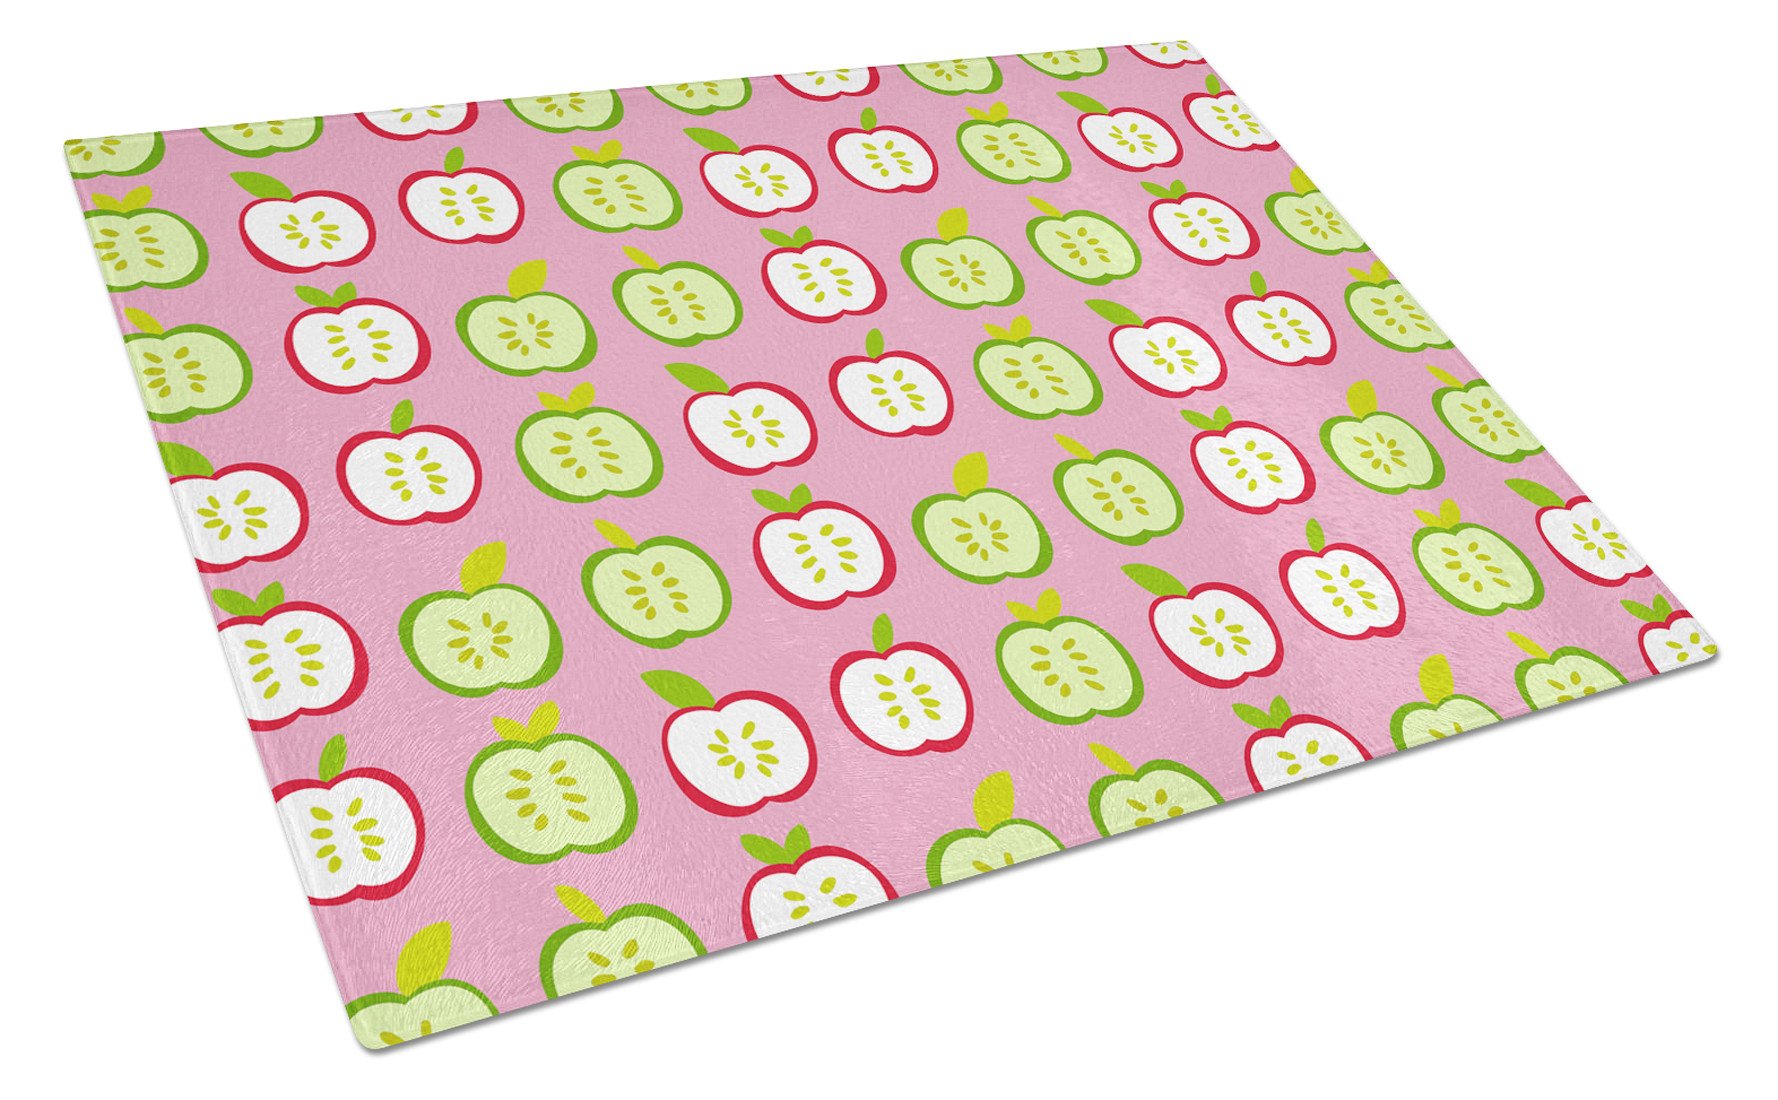 Apples on Pink Glass Cutting Board Large BB5141LCB by Caroline's Treasures